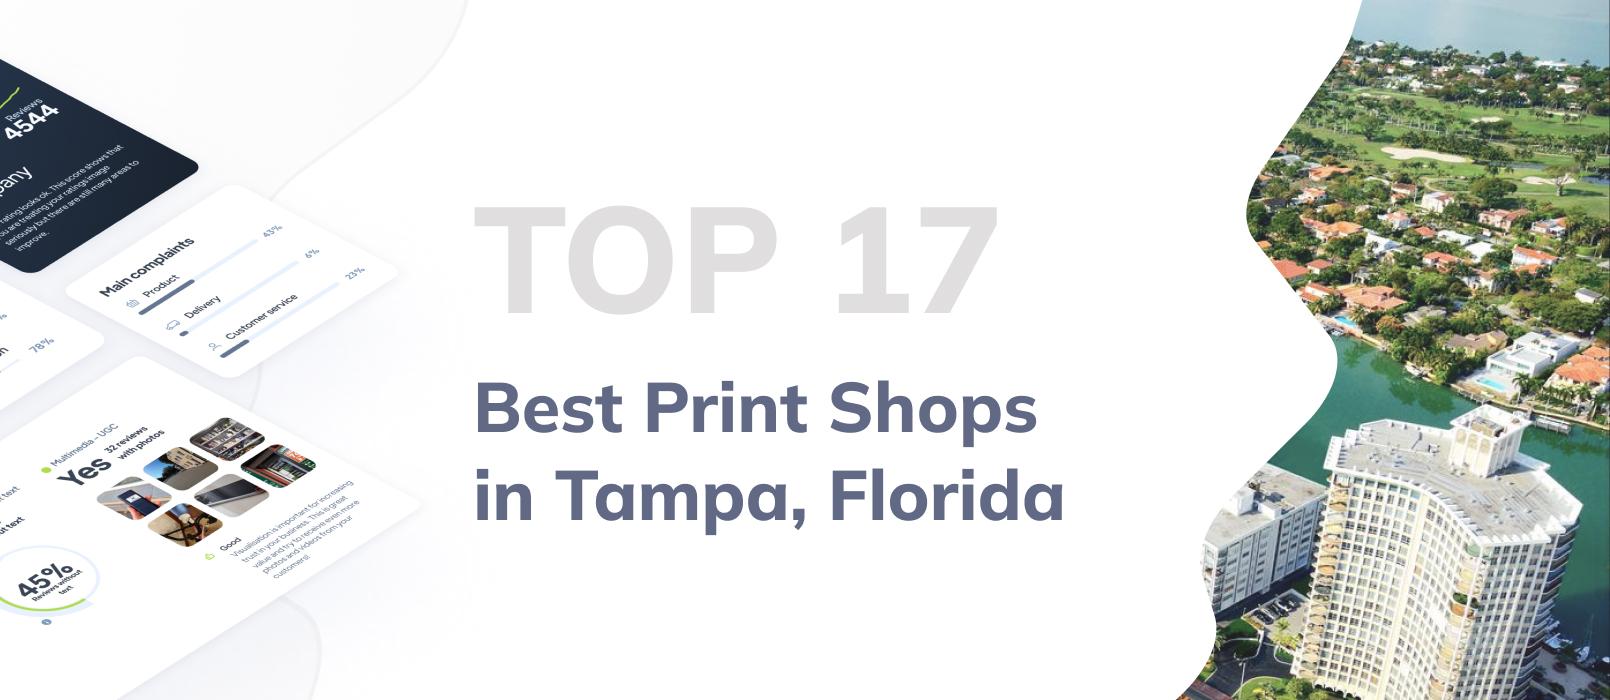 Best Print Shops in Tampa, Florida – TOP 17 Ranking